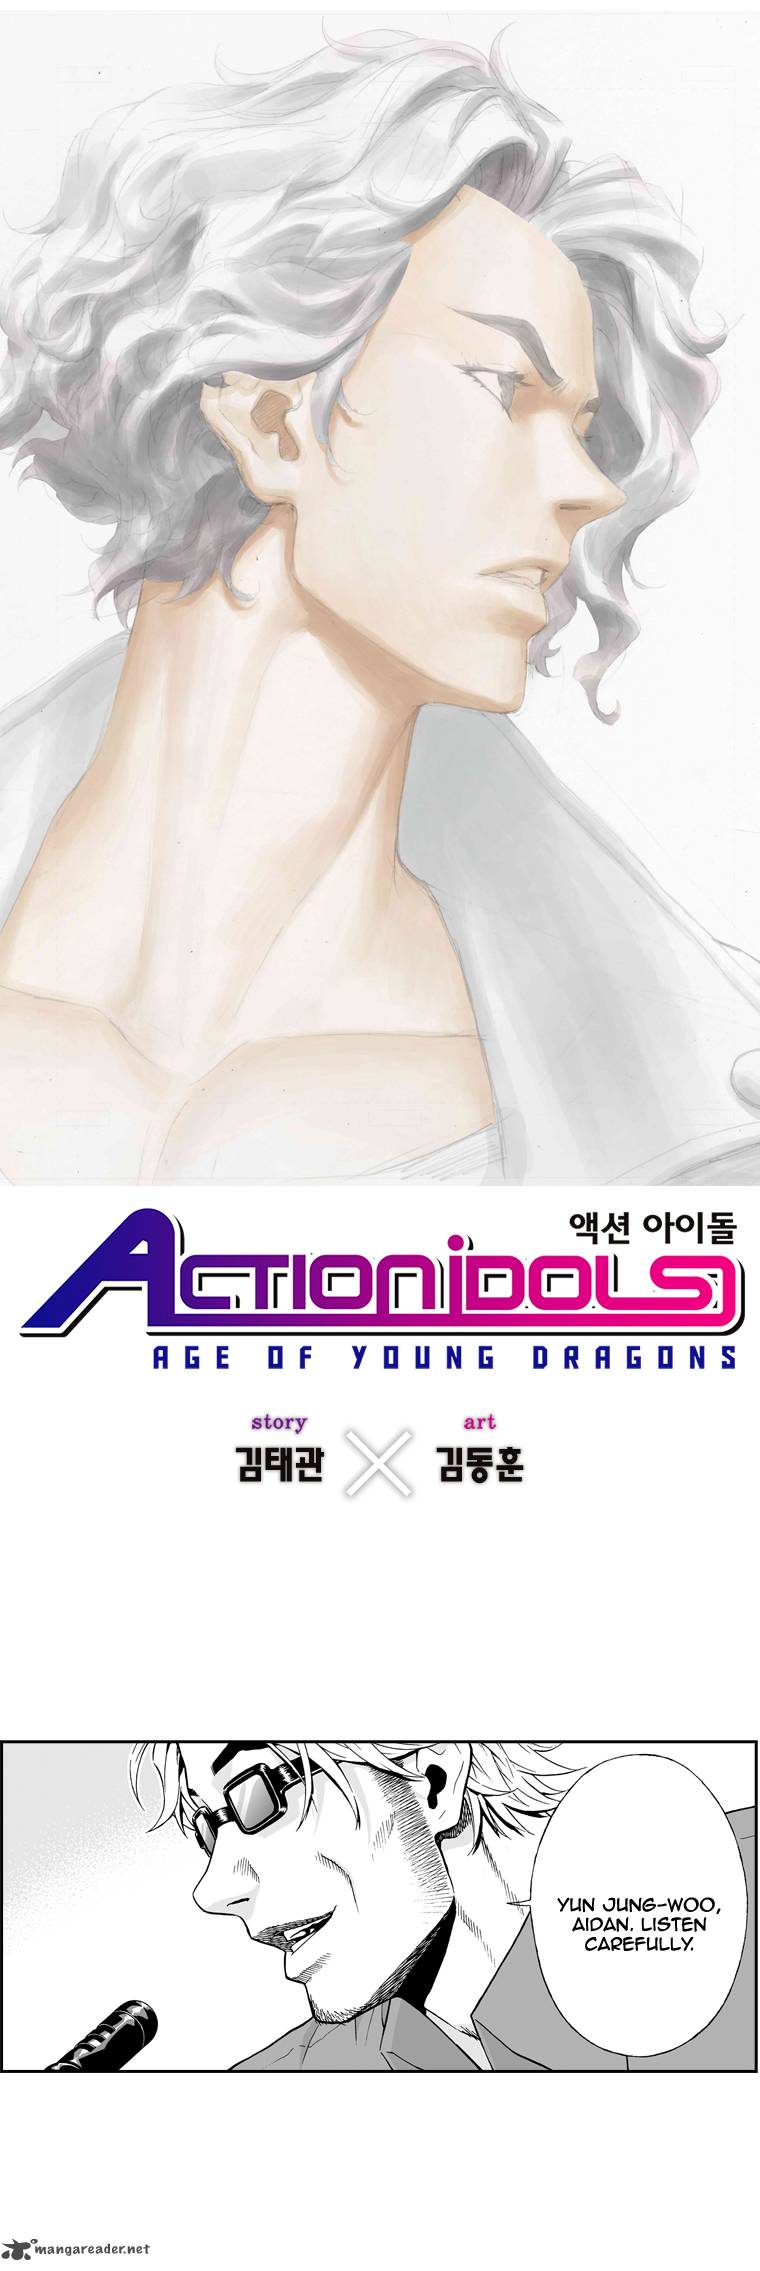 Action Idols Age Of Young Dragons 12 2